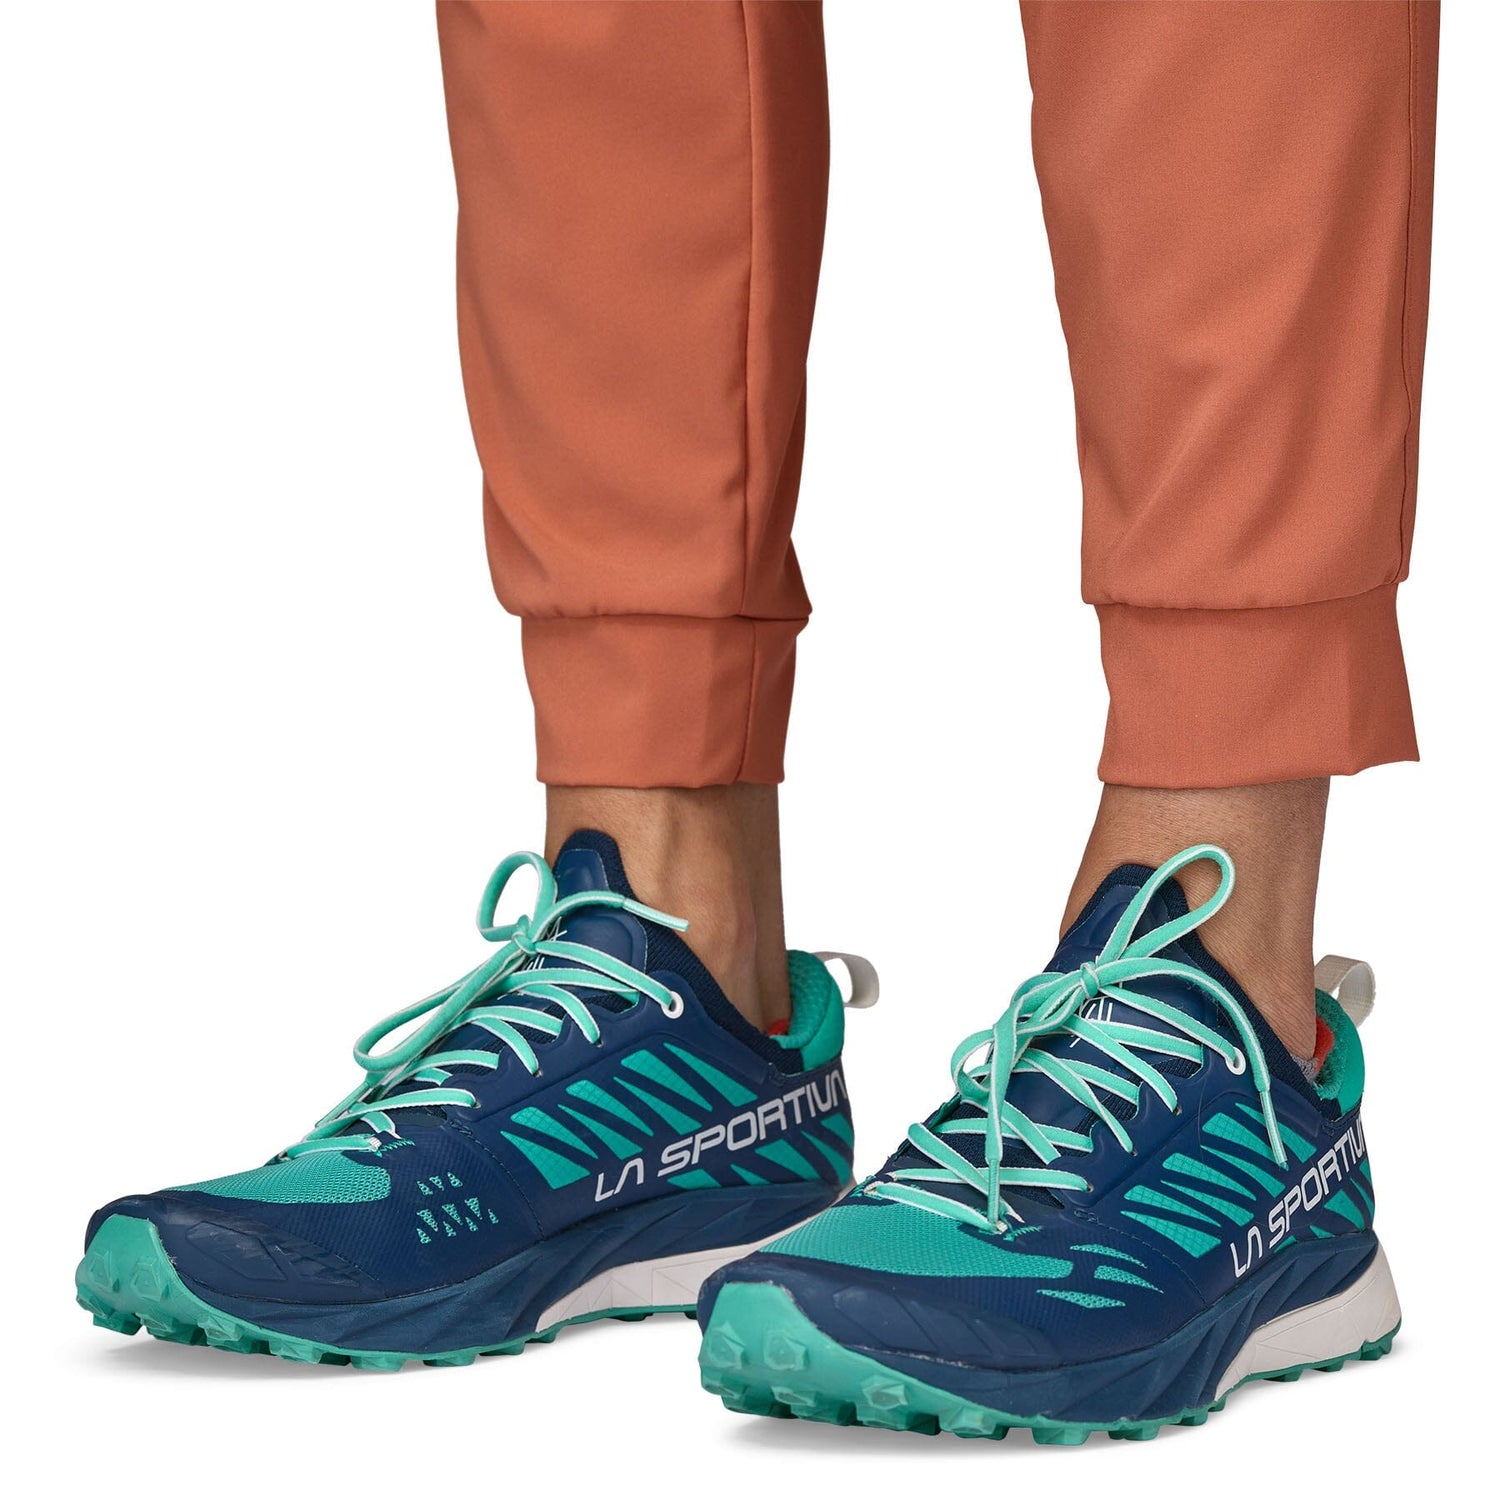 Patagonia W's Terrebonne Joggers - Recycled polyester Sienna Clay Pants